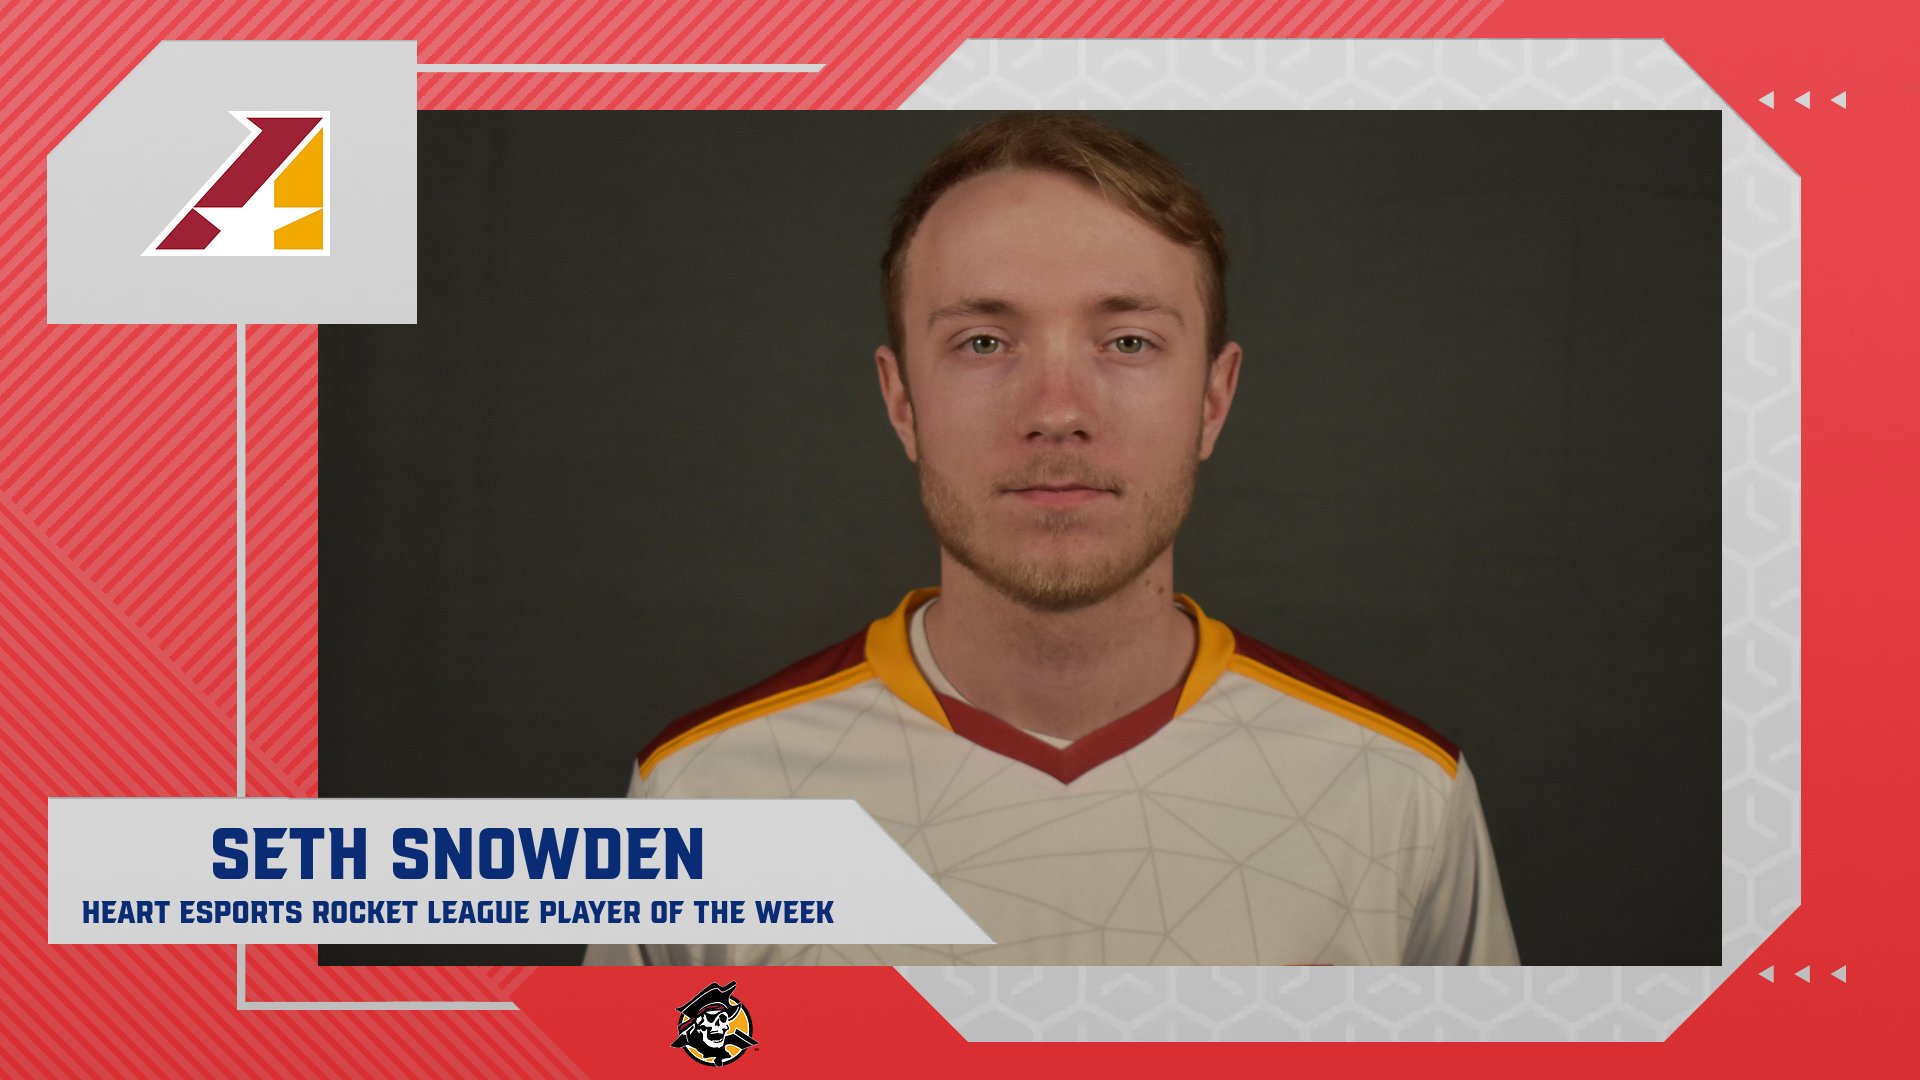 Seth Snowden Selected Heart Esports Rocket League Player of the Week